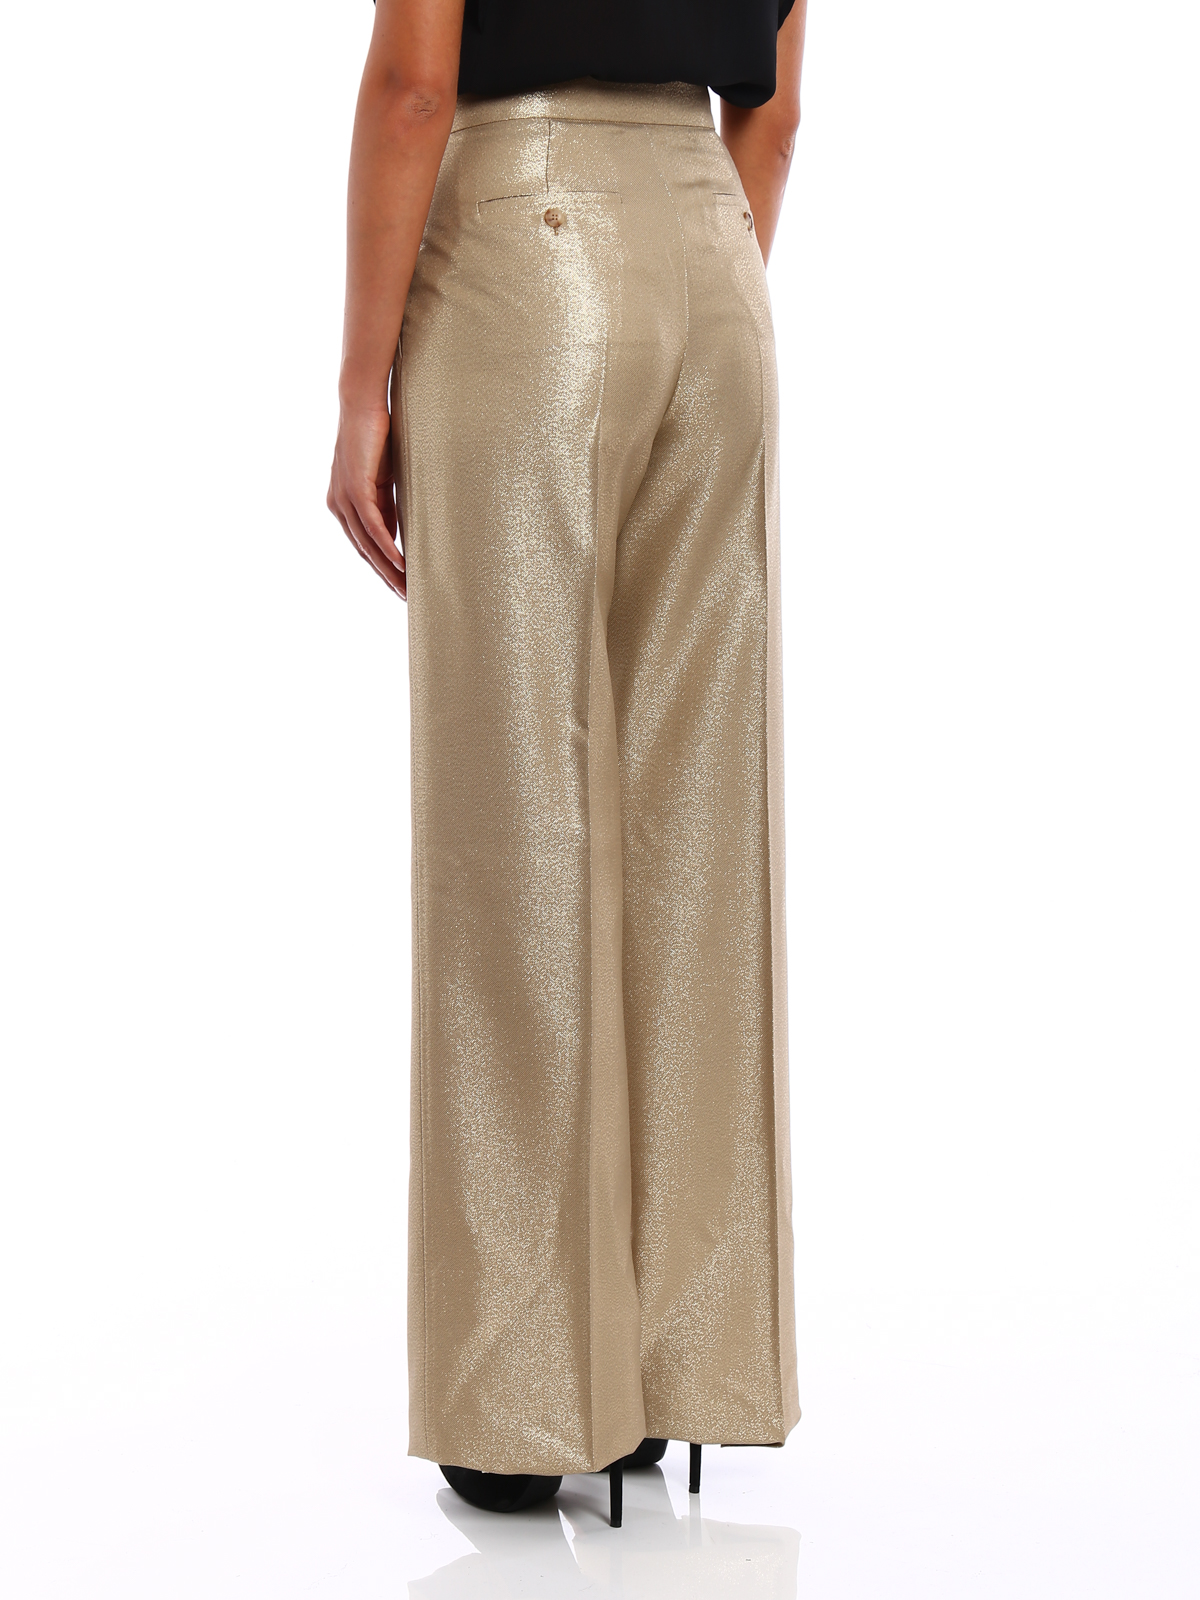 https://images.thebestshops.com/product_images/original/iKRIX-max-mara-tailored--formal-trousers-eva-wool-and-lurex-formal-trousers-00000111042f00s013.jpg